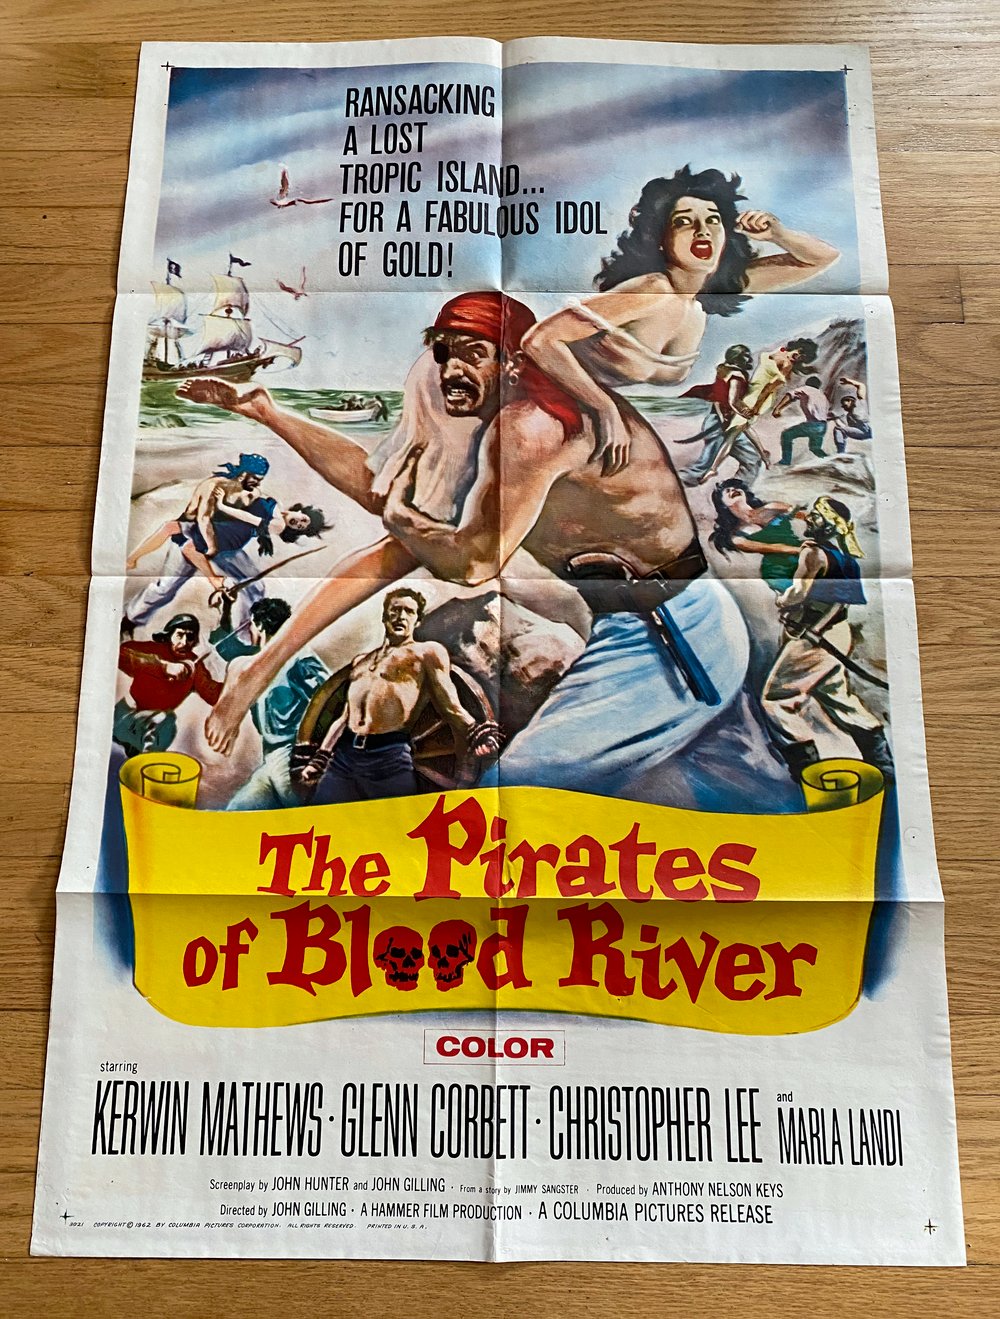 1962 THE PIRATES OF BLOOD RIVER Original U.S. One Sheet Movie Poster